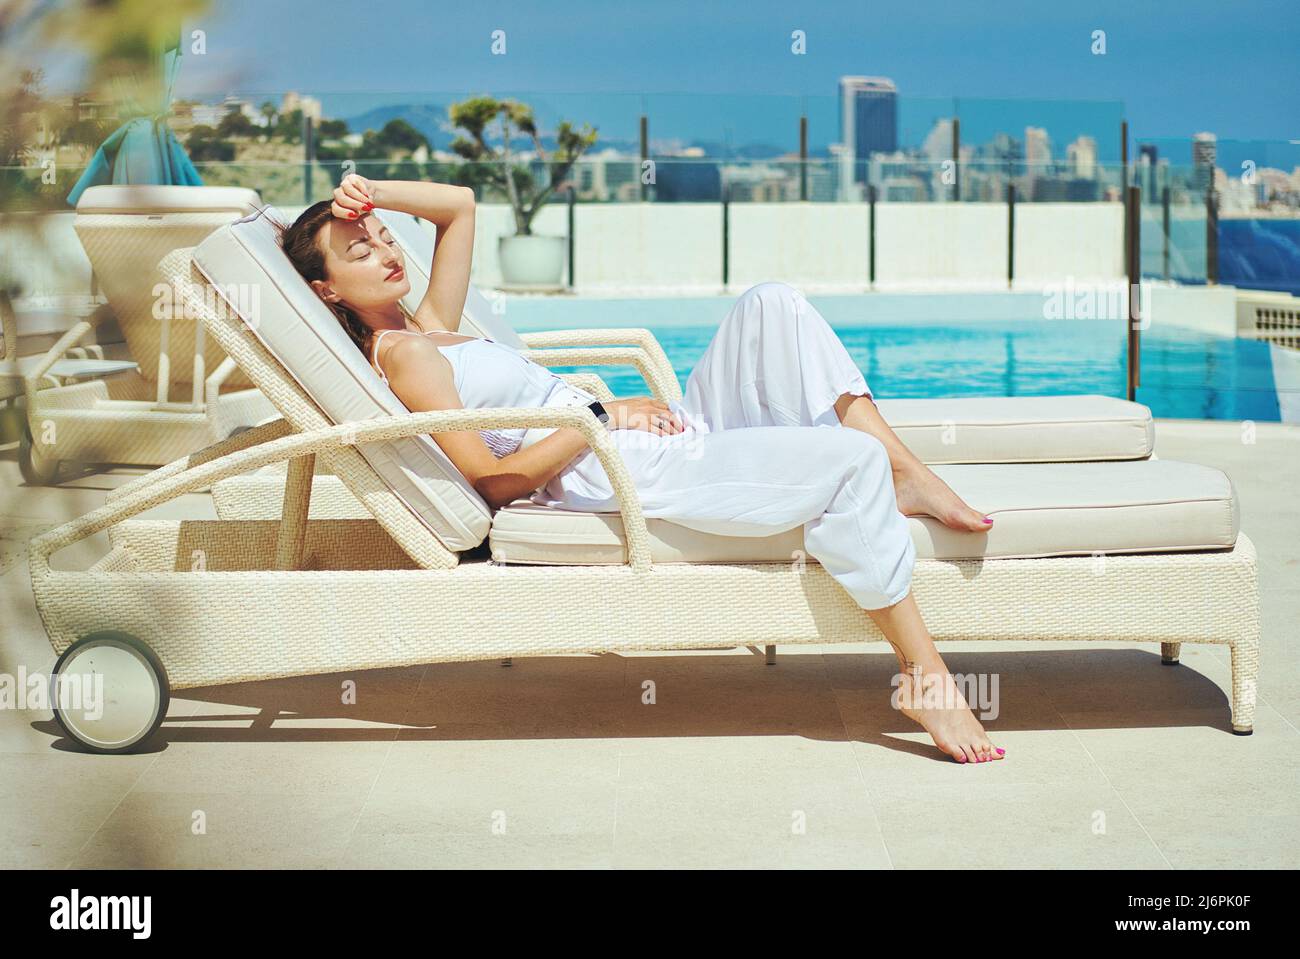 Young slim woman wear white summer suit relaxing alone lay on sunbed ...